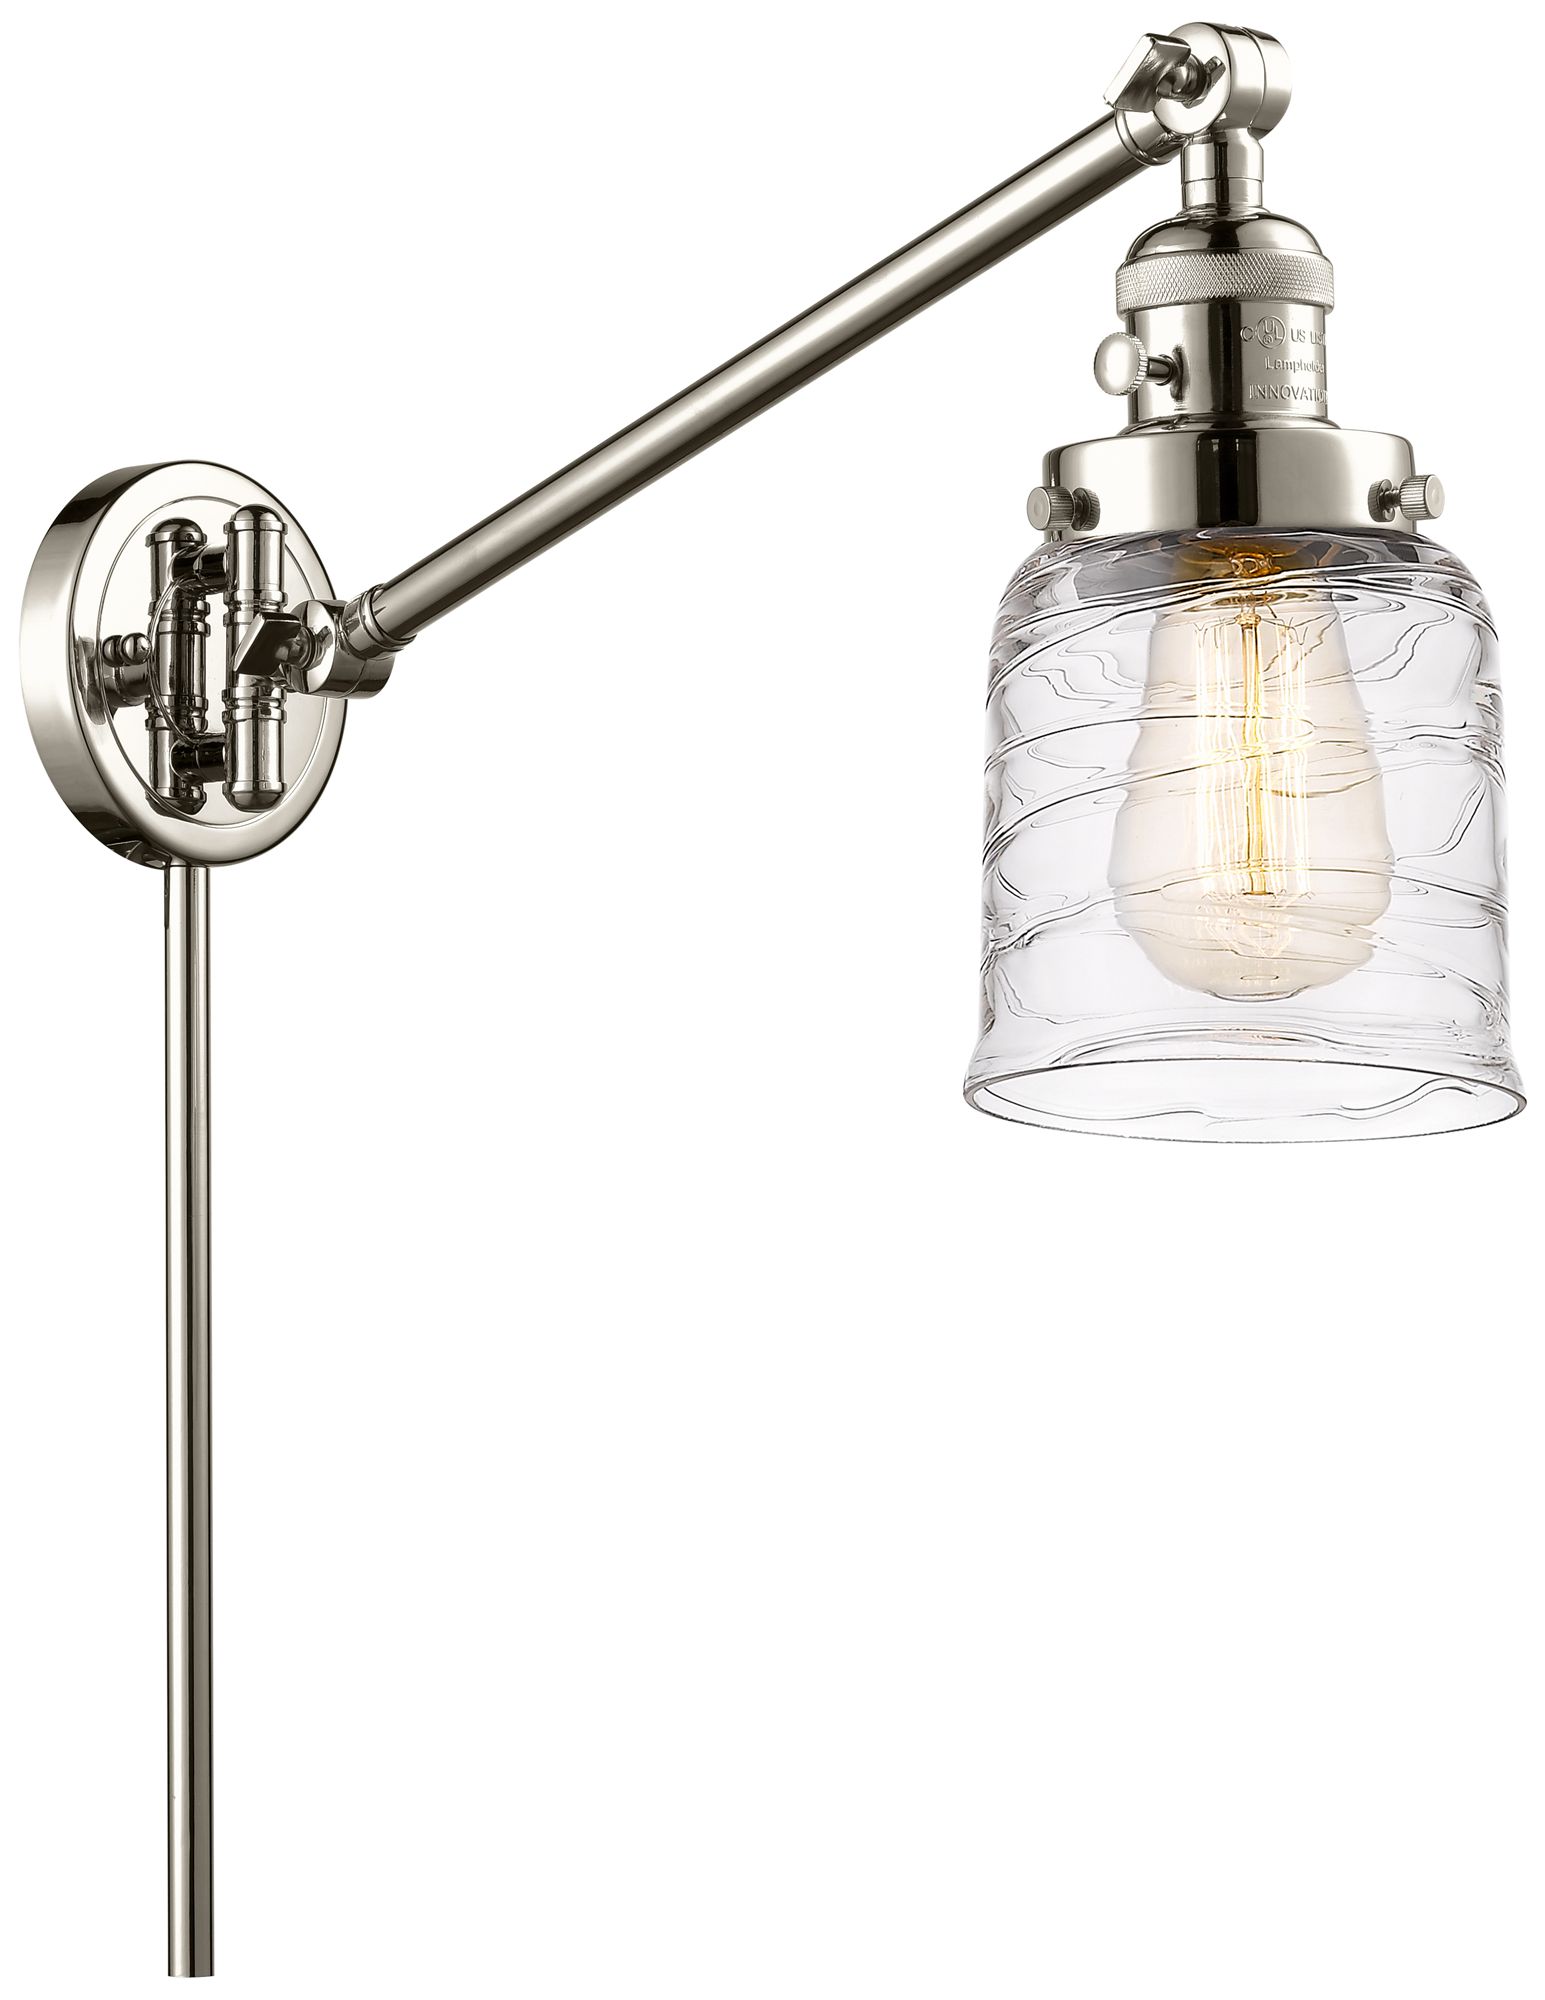 Bell 8" Polished Nickel LED Swing Arm With Deco Swirl Shade